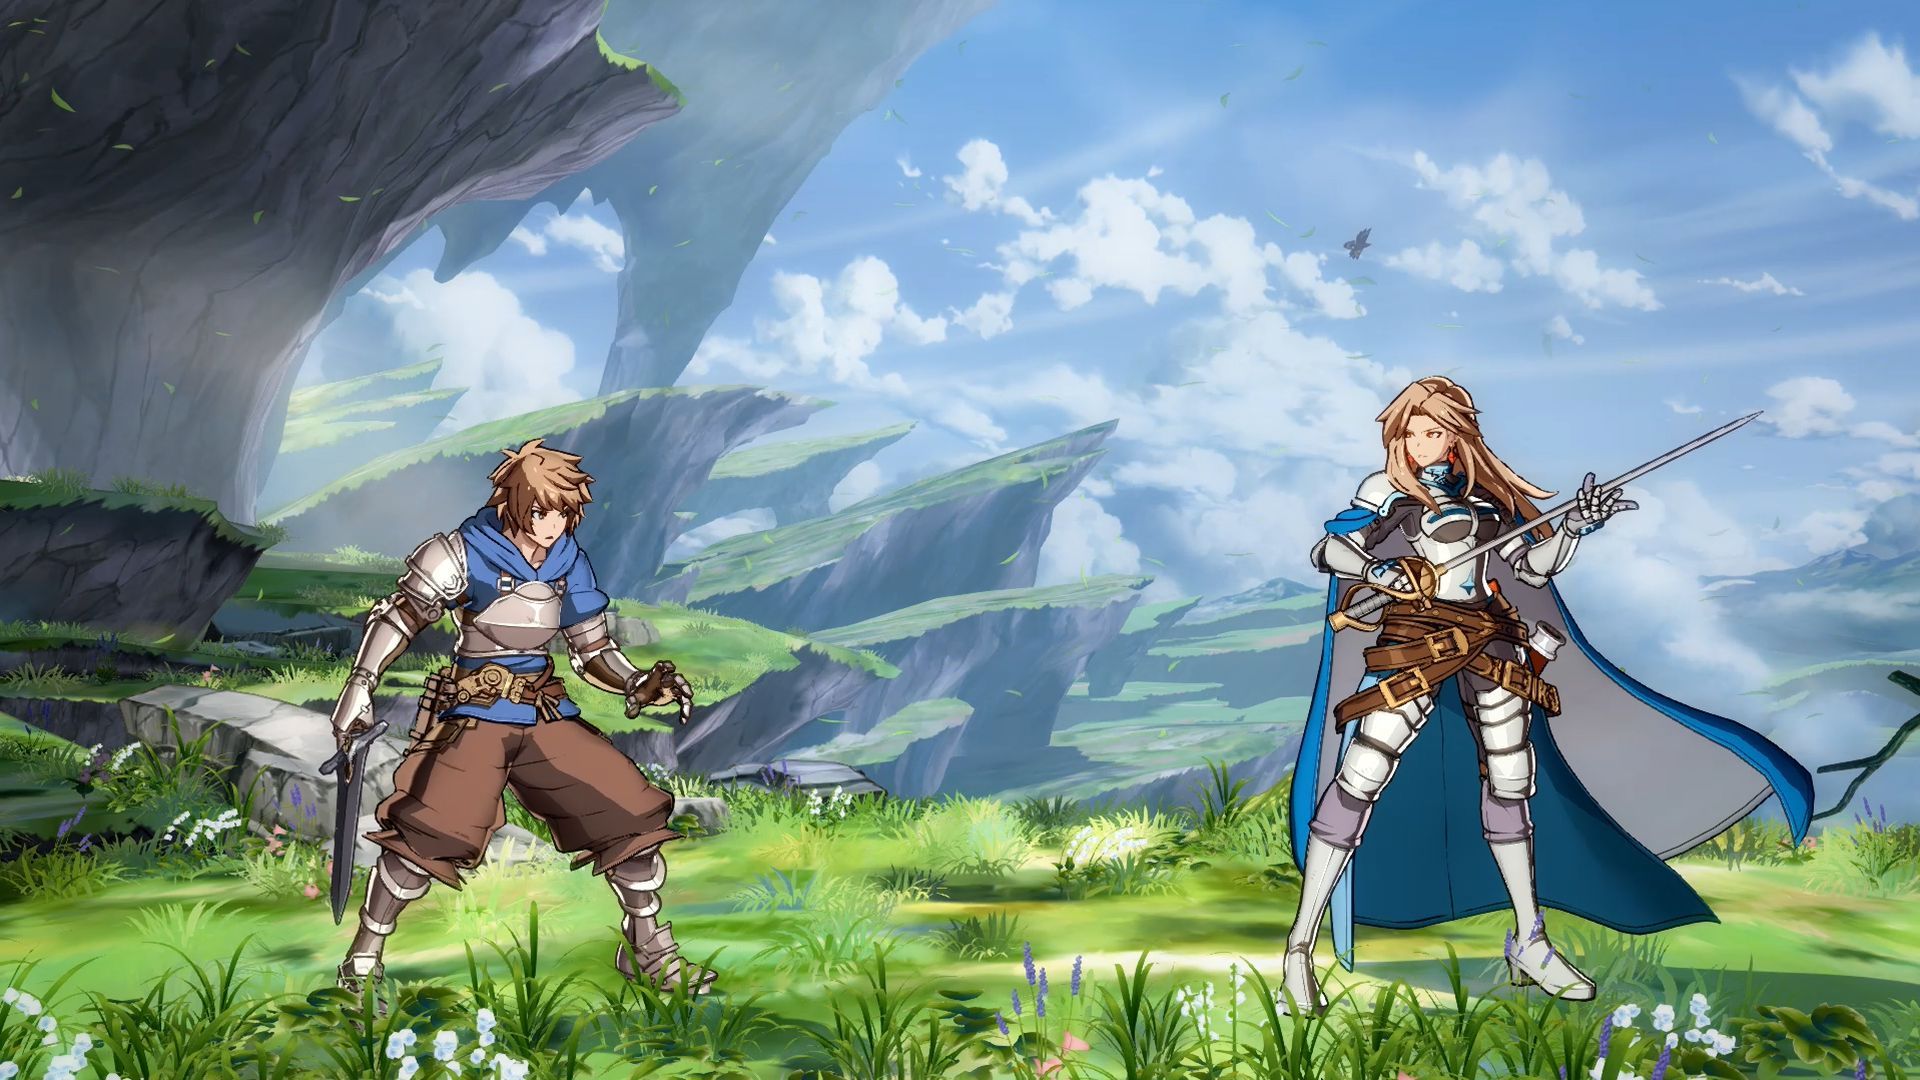 Granblue Fantasy: Versus Debuts on Top of Japanese Charts